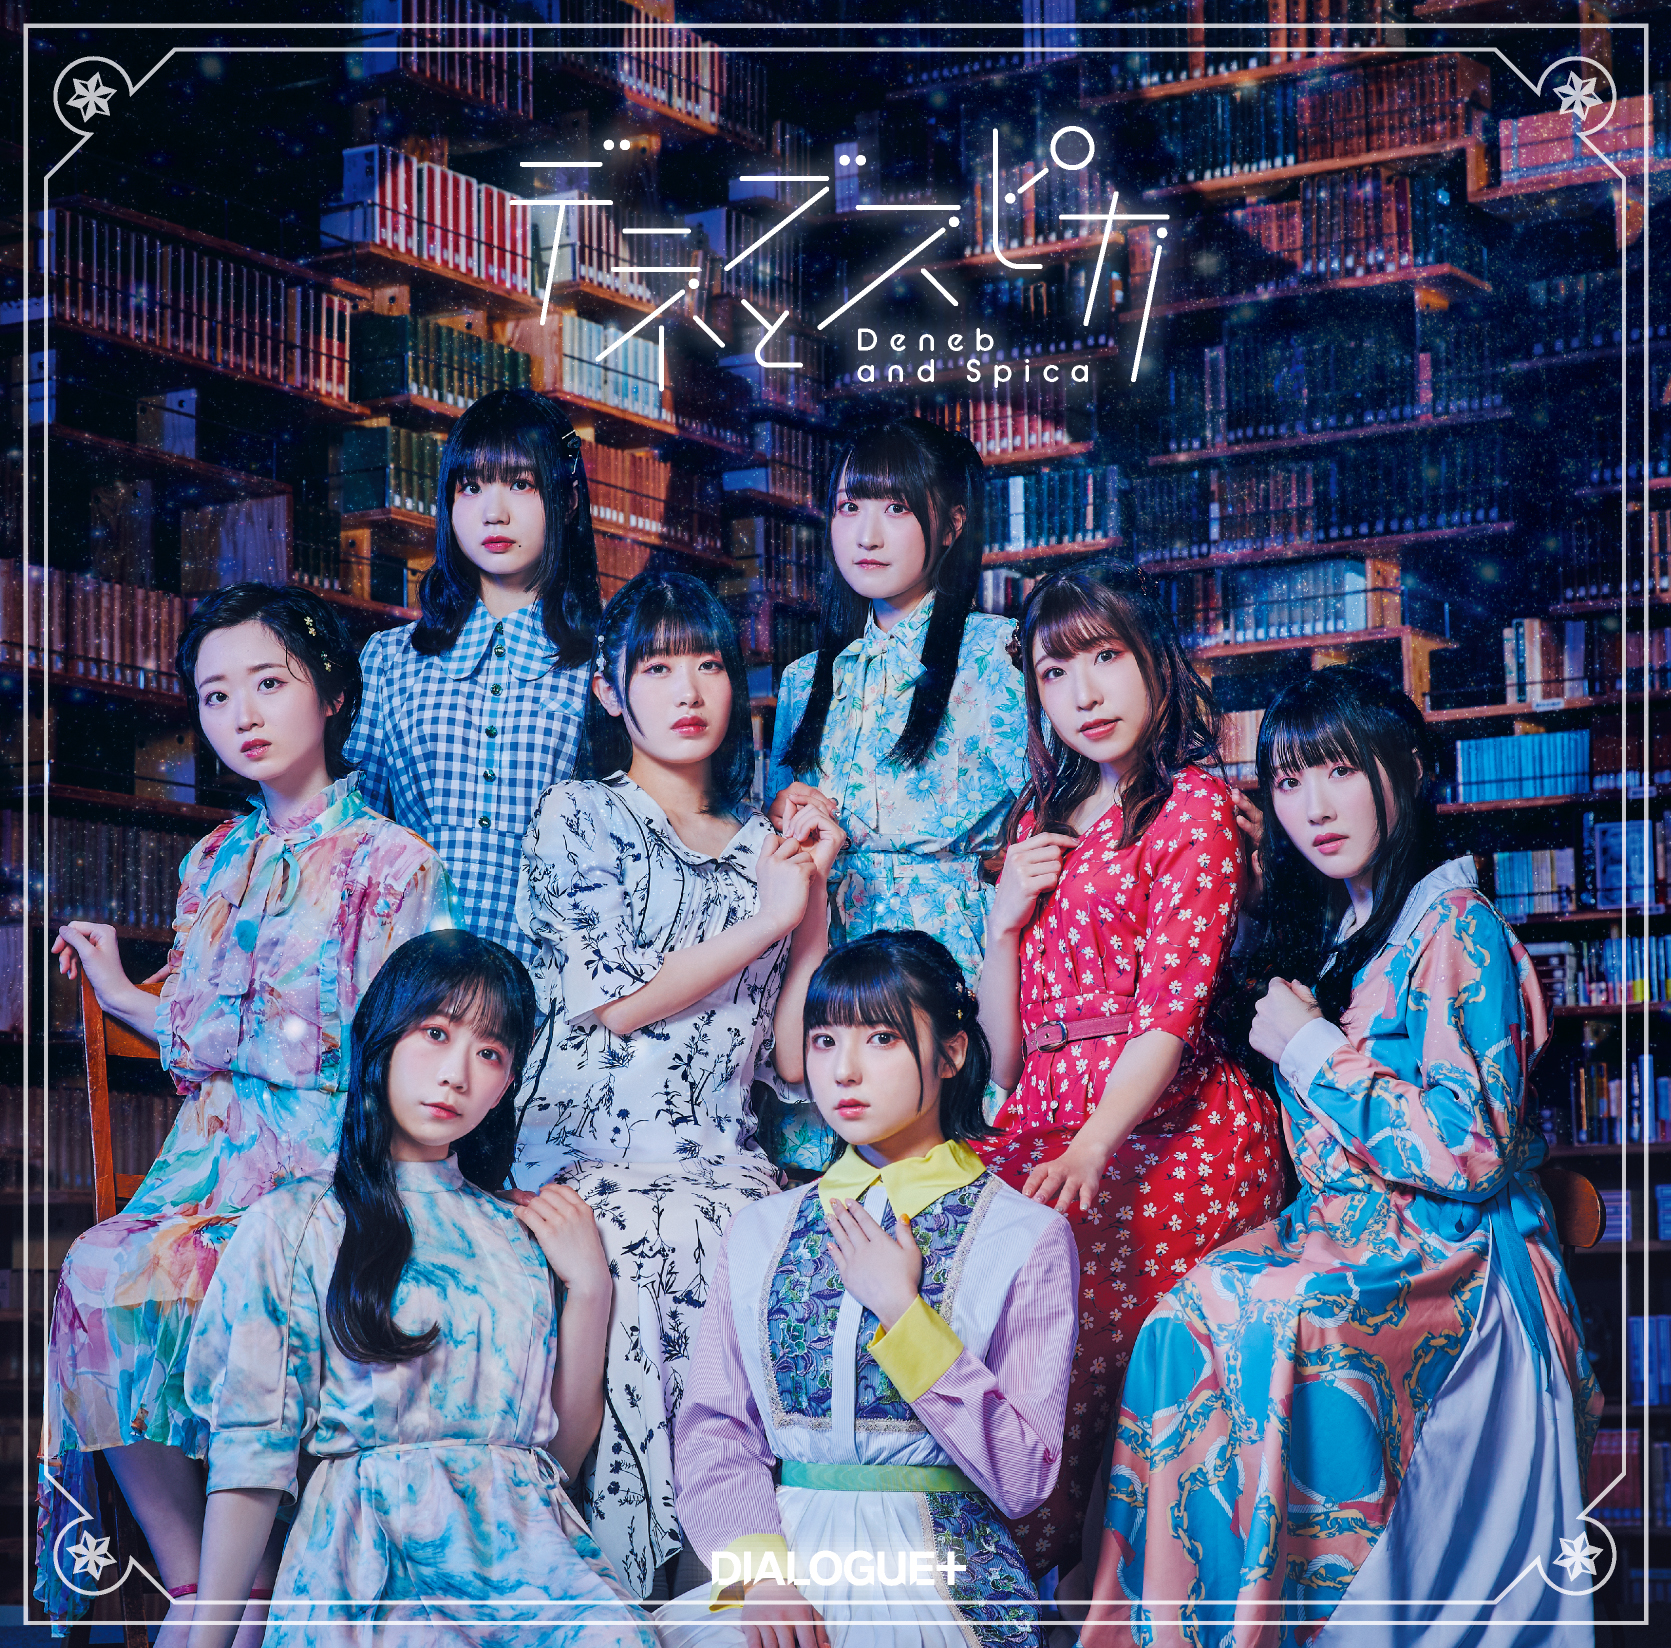 DIALOGUE＋ 7th Single "Deneb to Spica"Limited Edition(CD＋Blu-ray) Release on August 24th, 2022